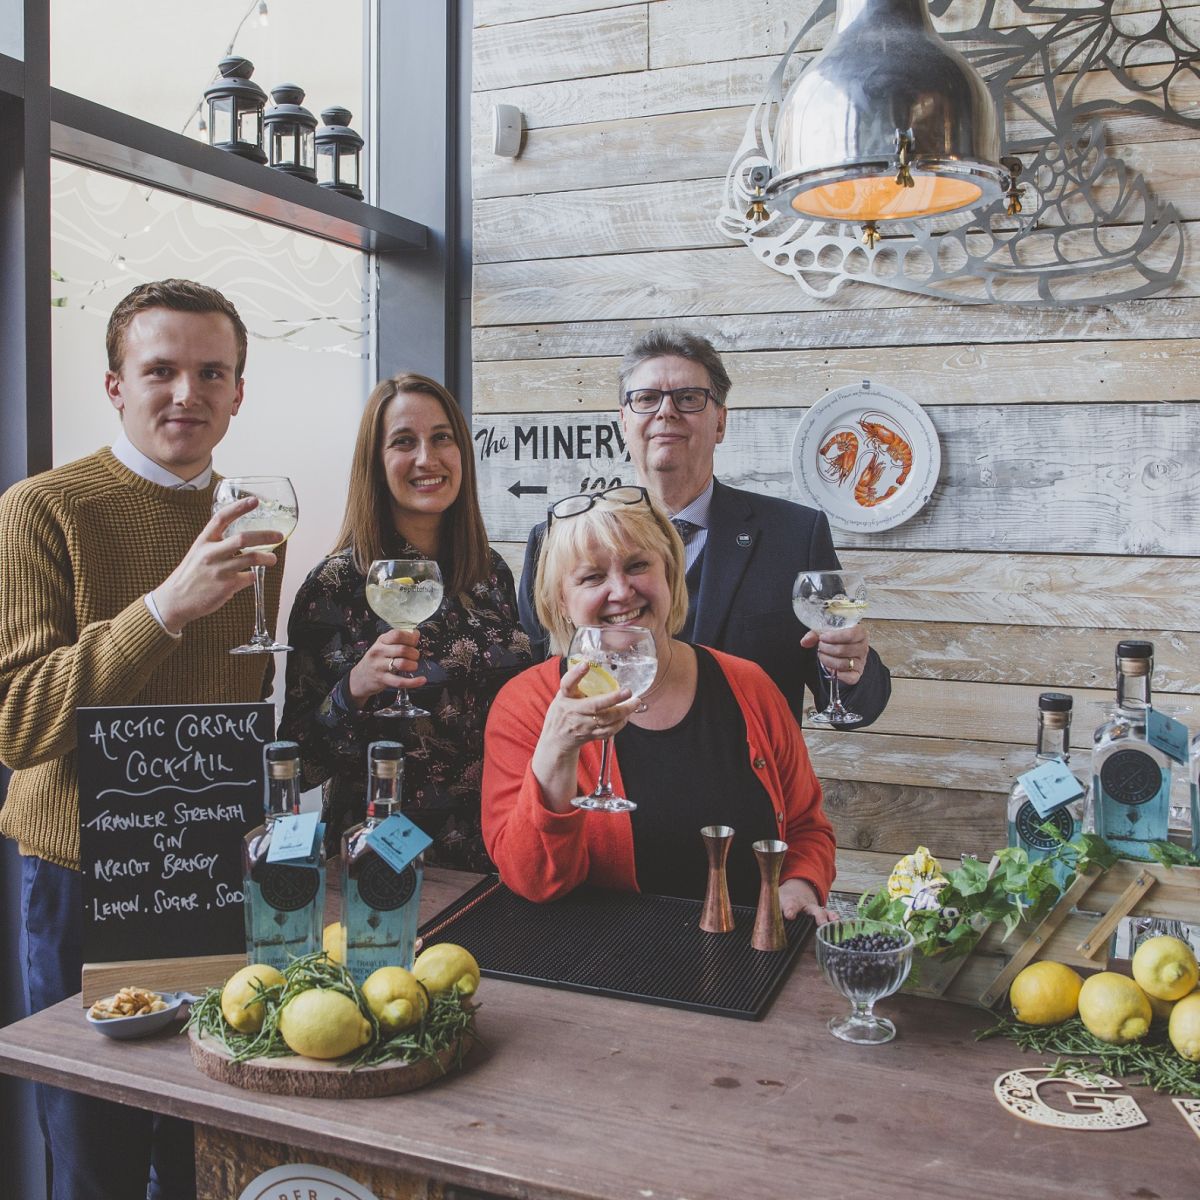 Team members attend the Gin Launch